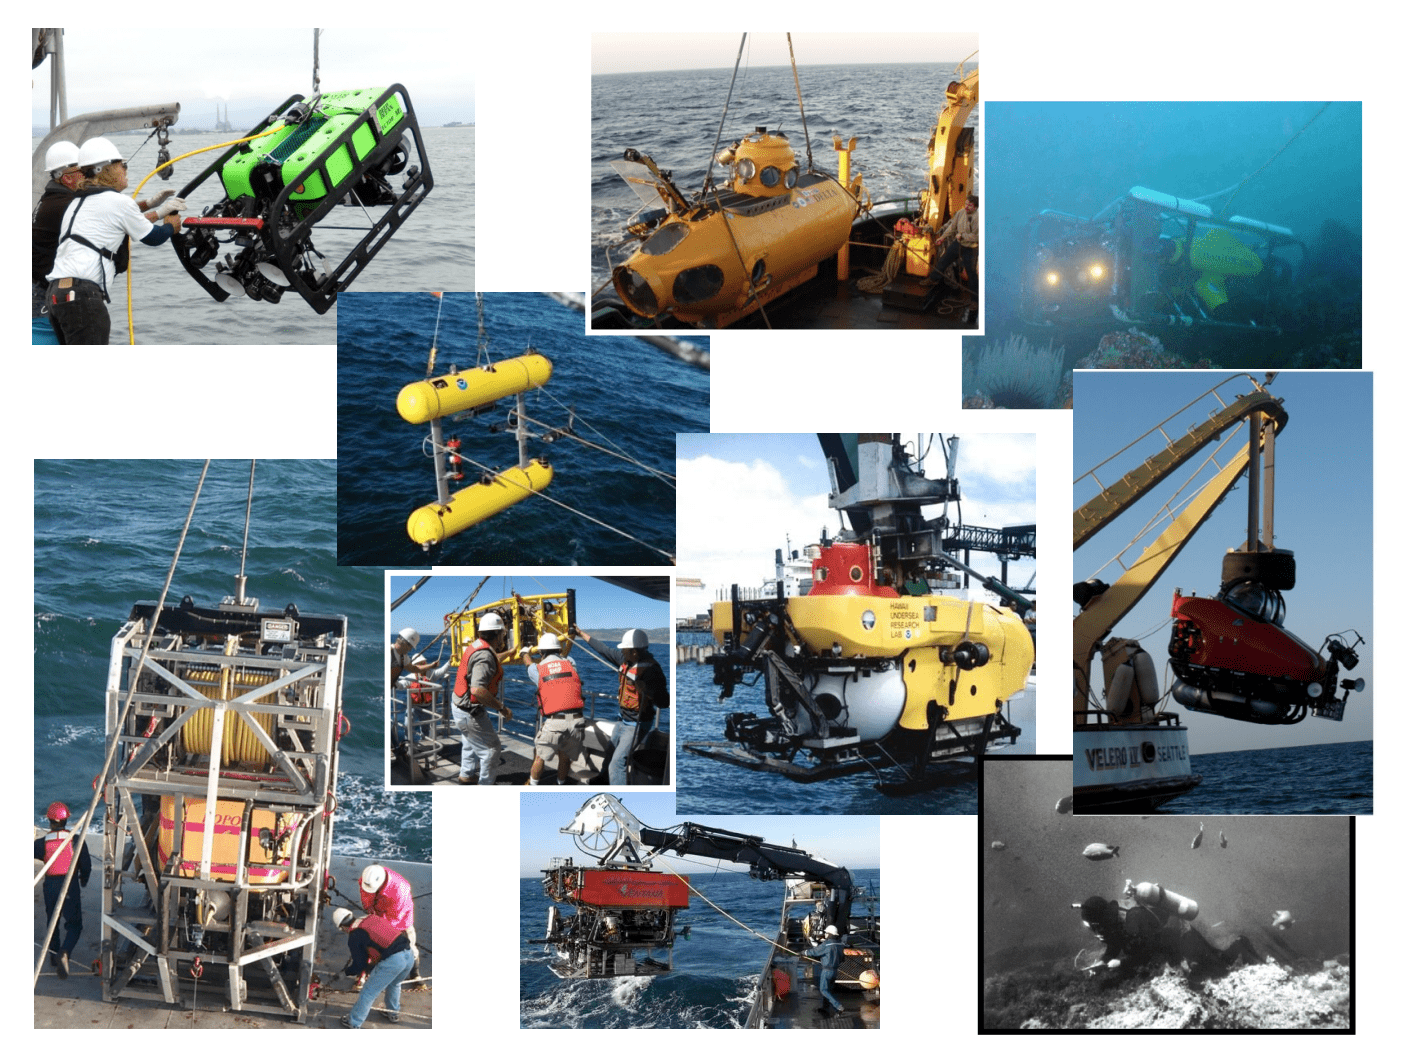 June 2015 - A COMPARATIVE ASSESSMENT OF UNDERWATER VISUAL SURVEY TOOLS: 1